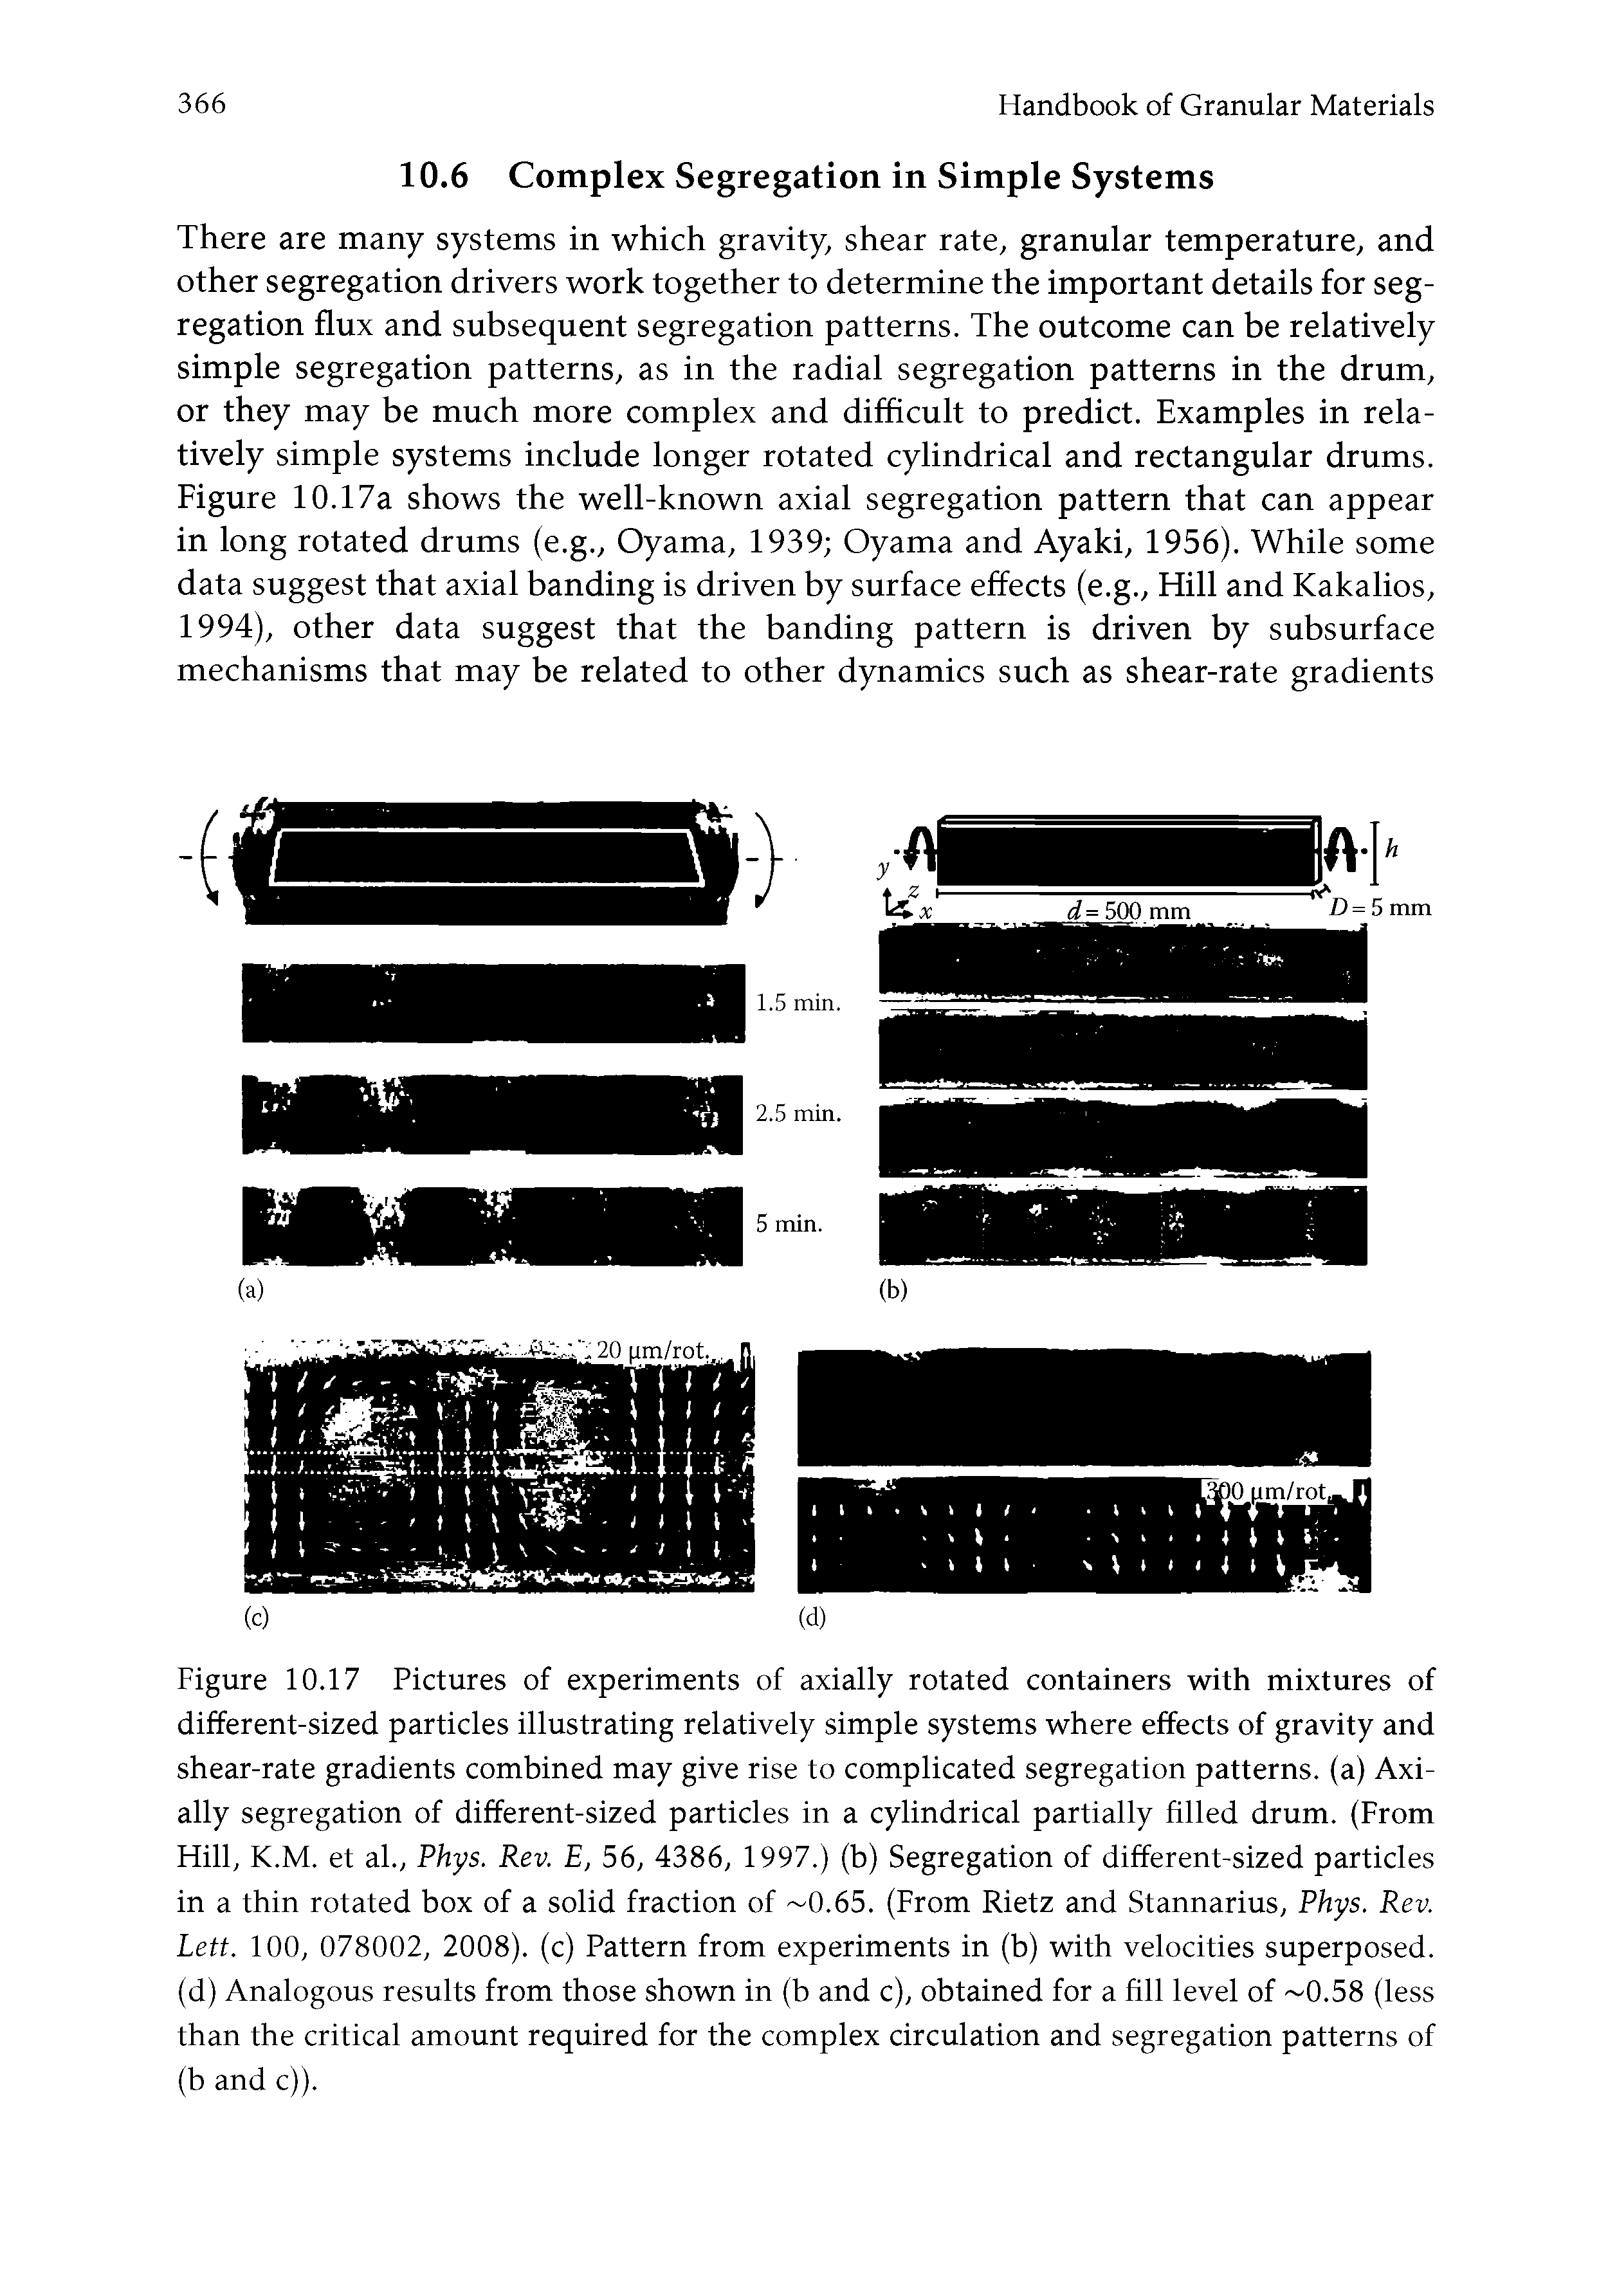 Figure 10.17 Pictures of experiments of axially rotated containers with mixtures of different-sized particles illustrating relatively simple systems where effects of gravity and shear-rate gradients combined may give rise to complicated segregation patterns, (a) Axially segregation of different-sized particles in a cylindrical partially filled drum. (From Hill, K.M. et al., Phys. Rev. E, 56, 4386, 1997.) (b) Segregation of different-sized particles in a thin rotated box of a solid fraction of 0.65. (From Rietz and Stannarius, Phys. Rev. Lett. 100, 078002, 2008). (c) Pattern from experiments in (b) with velocities superposed, (d) Analogous results from those shown in (b and c), obtained for a fill level of 0.58 (less than the critical amount required for the complex circulation and segregation patterns of (b and c)).